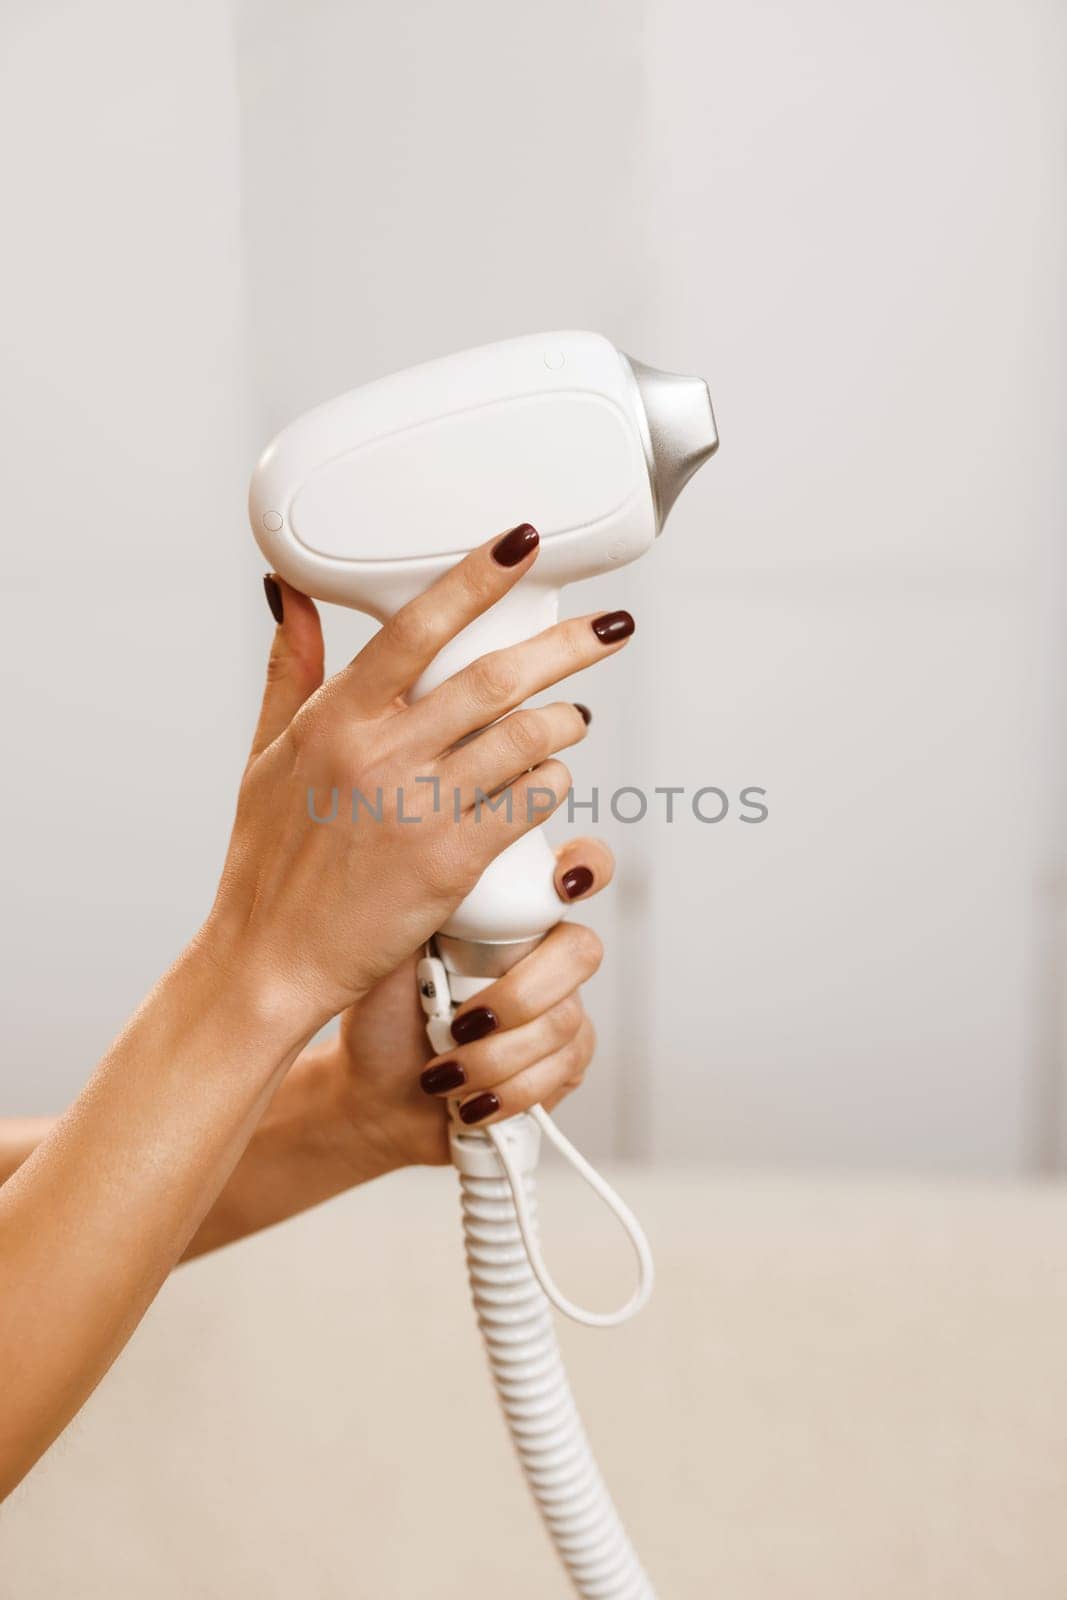 Body Care. Underarm Laser Hair Removal. Woman tunes a laser hair removal machine. She holds a working part of the epilator in her hands and poses for a photo.